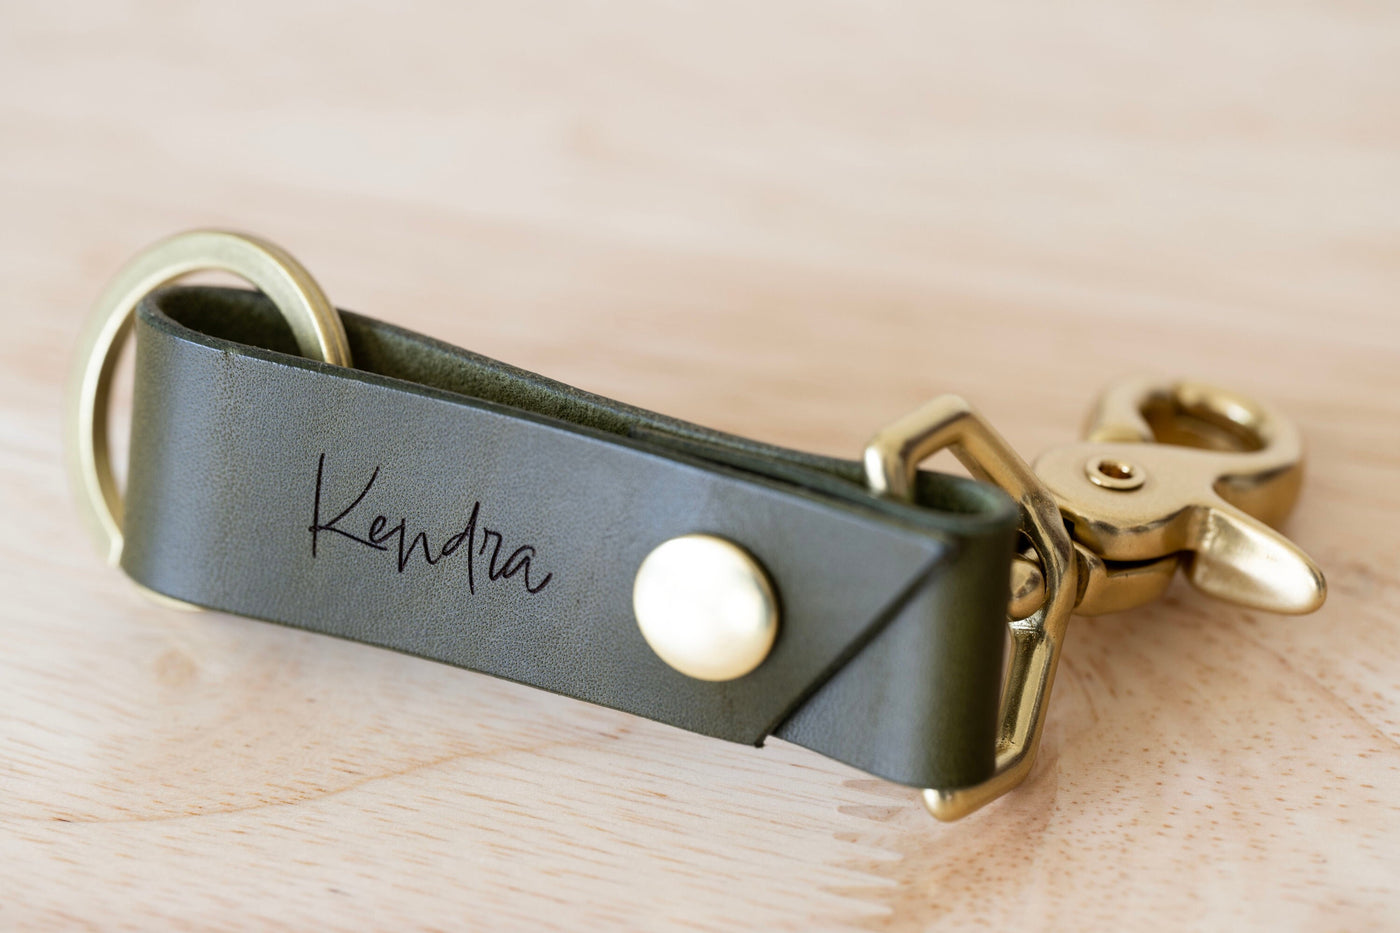 Boho Leather Keychain, Personalized Key Snap, Custom Leather Key chain, Key Fob Gift, Belt Clip Key Ring, Present For Him or Her